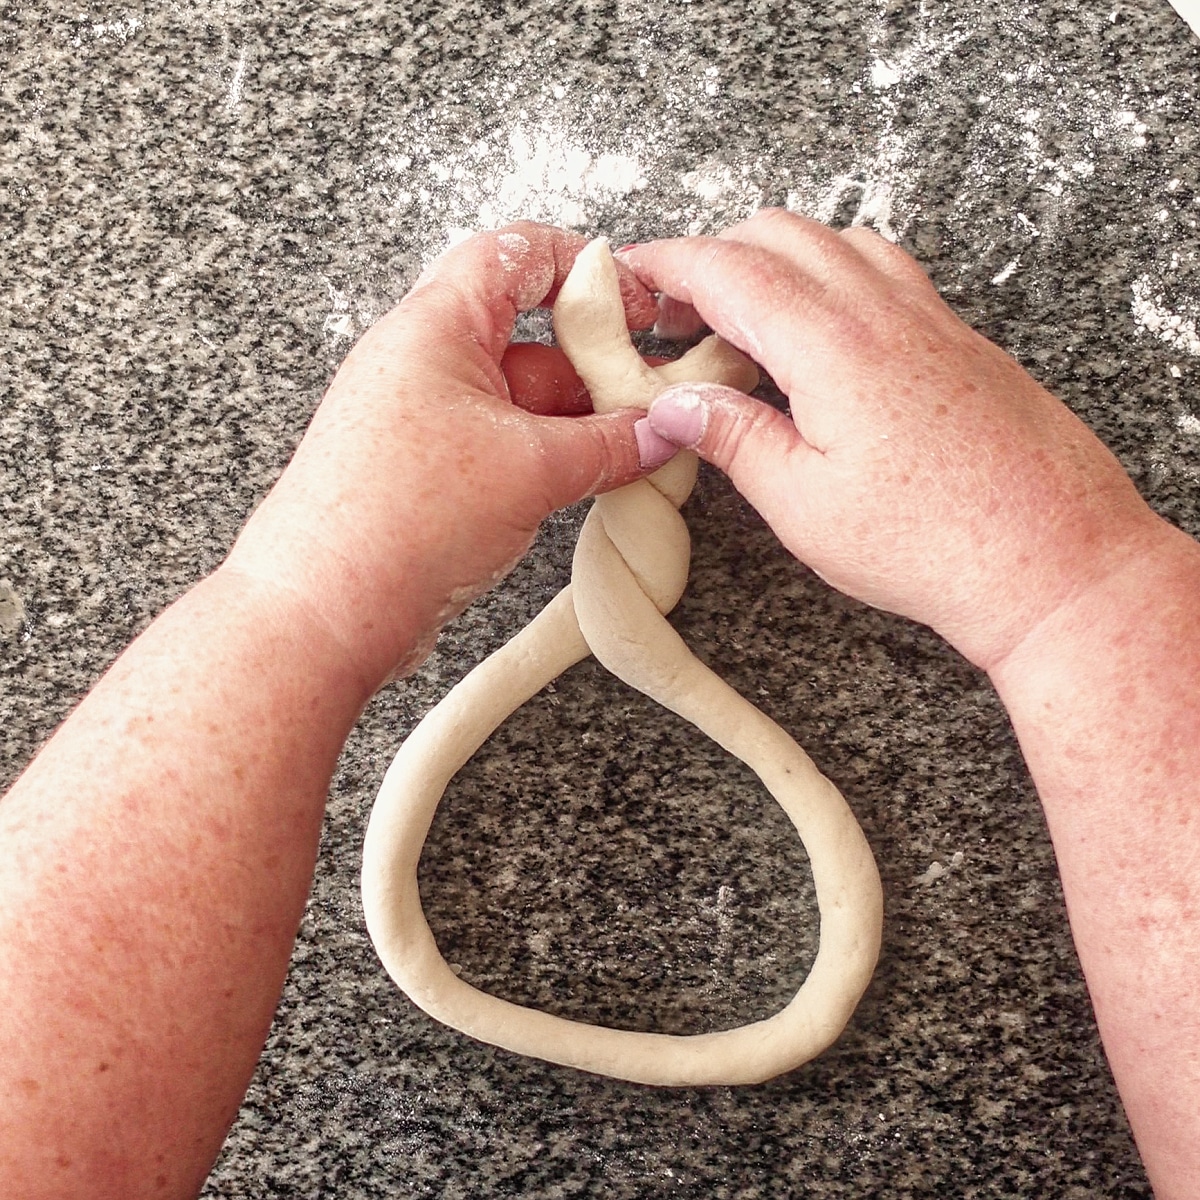 twisting the ends of the dough rope twice.